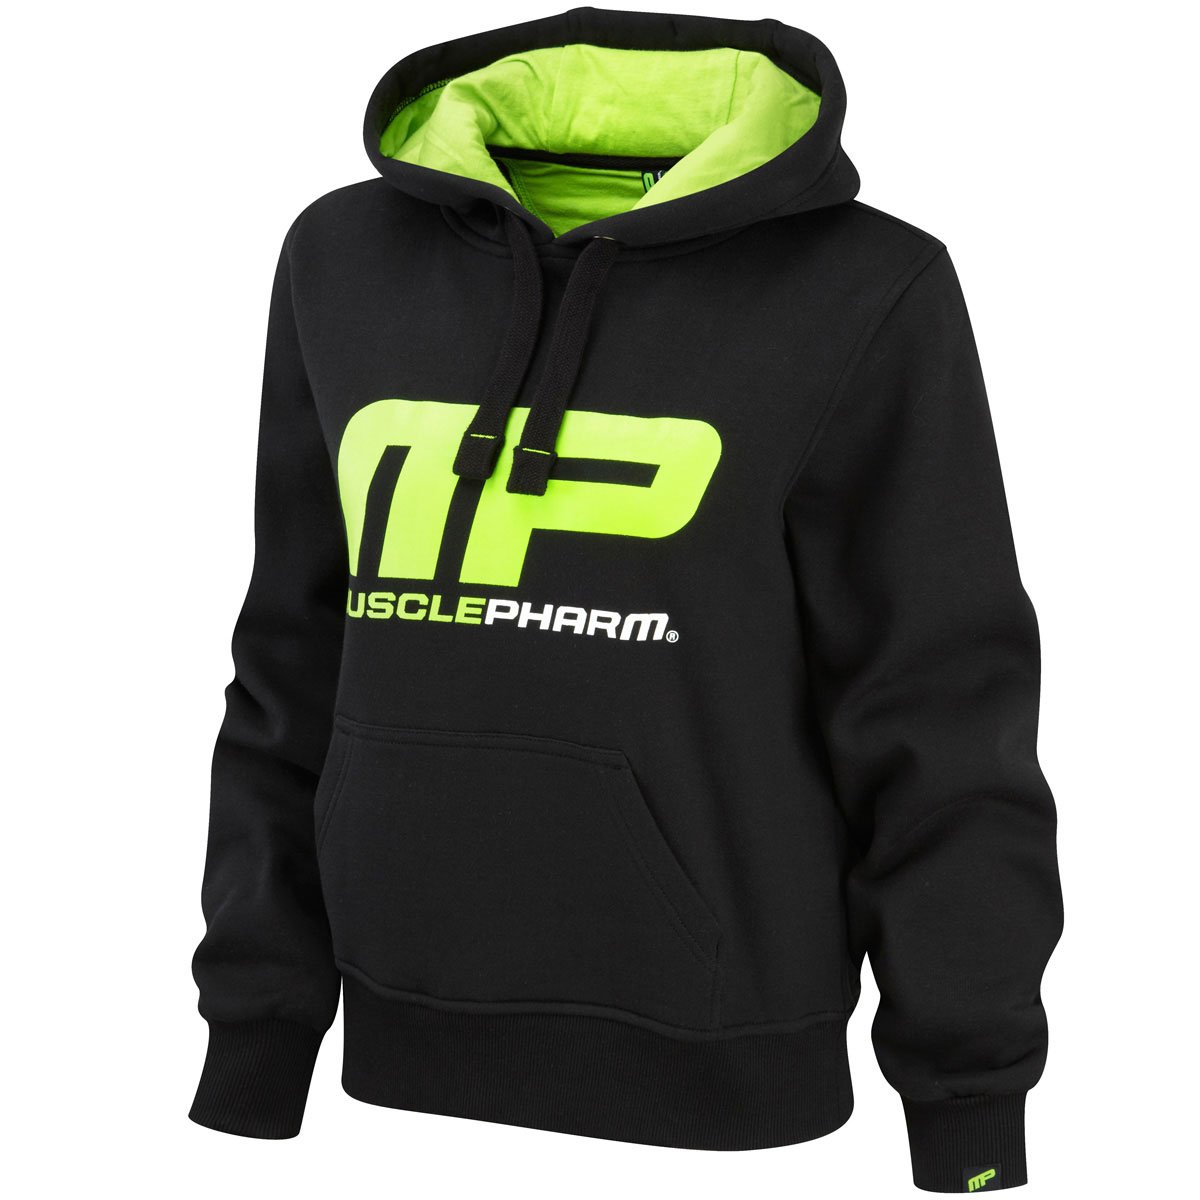 Muscle Pharm Damen Textilbekleidung Pullover Hoody, Lime Green/Black, M, MPLSWT452